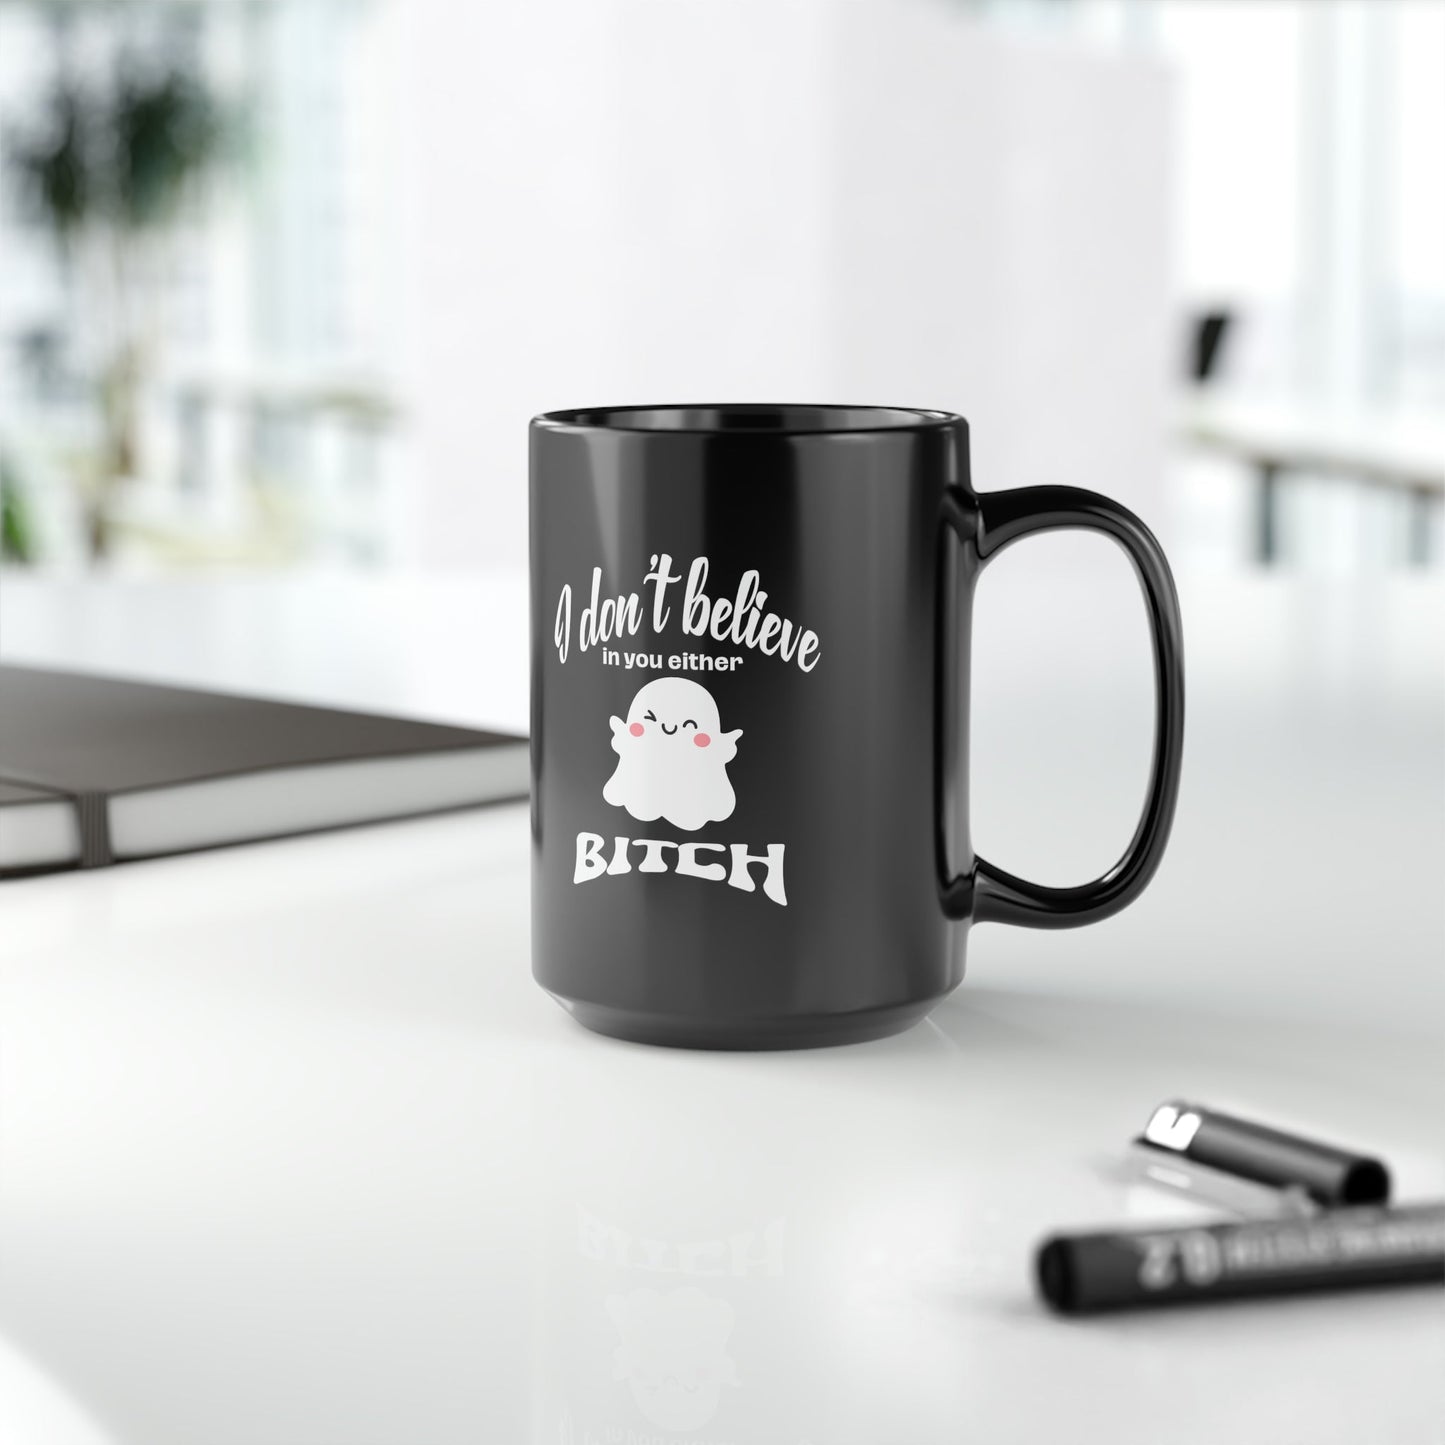 I Don't Believe in You Either... Black 15oz Ceramic Mug - Premium Mug from WitchesInkCanada - Shop now at Crystals and Sun Signs Co